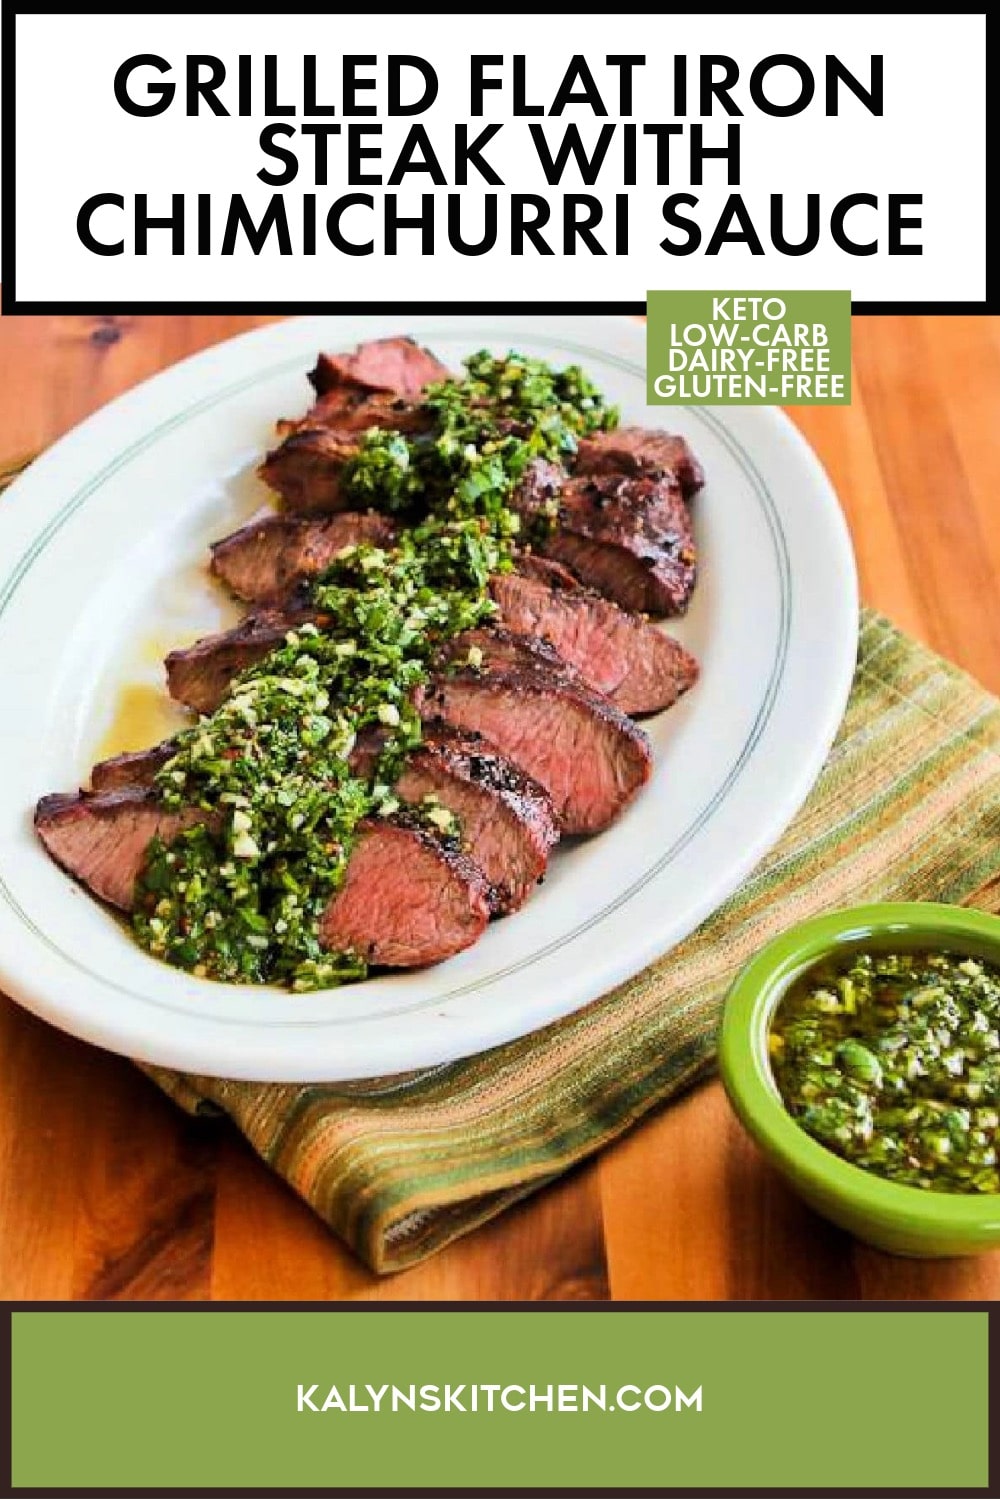 Pinterest image of Grilled Flat Iron Steak with Chimichurri Sauce